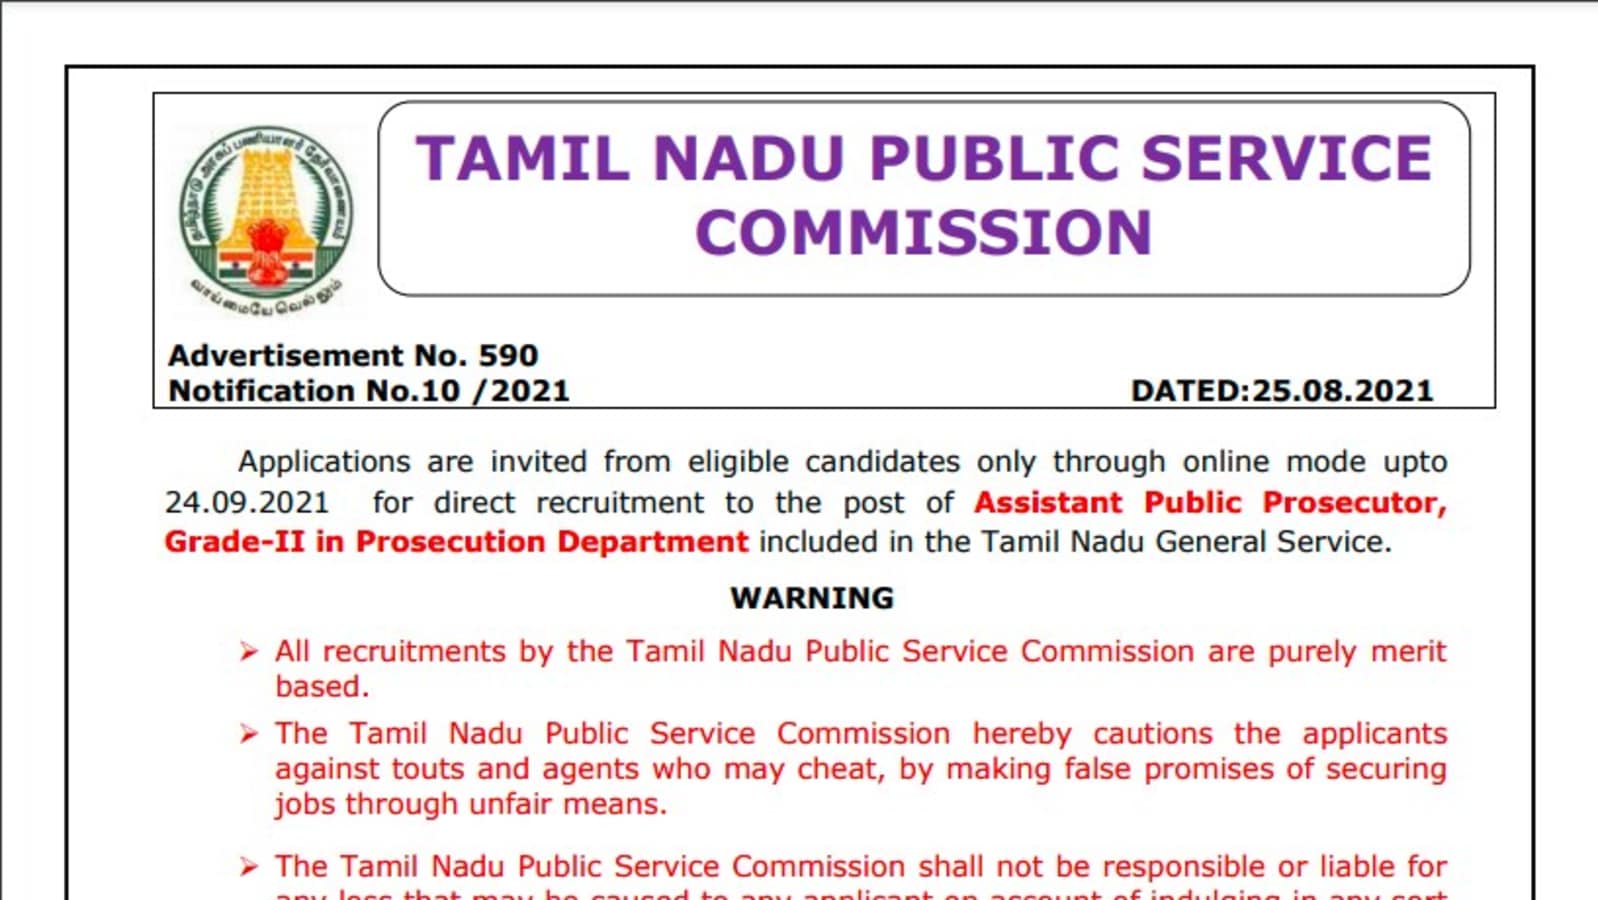 TNPSC recruitment 2021: Apply for 50 posts of assistant public prosecutor